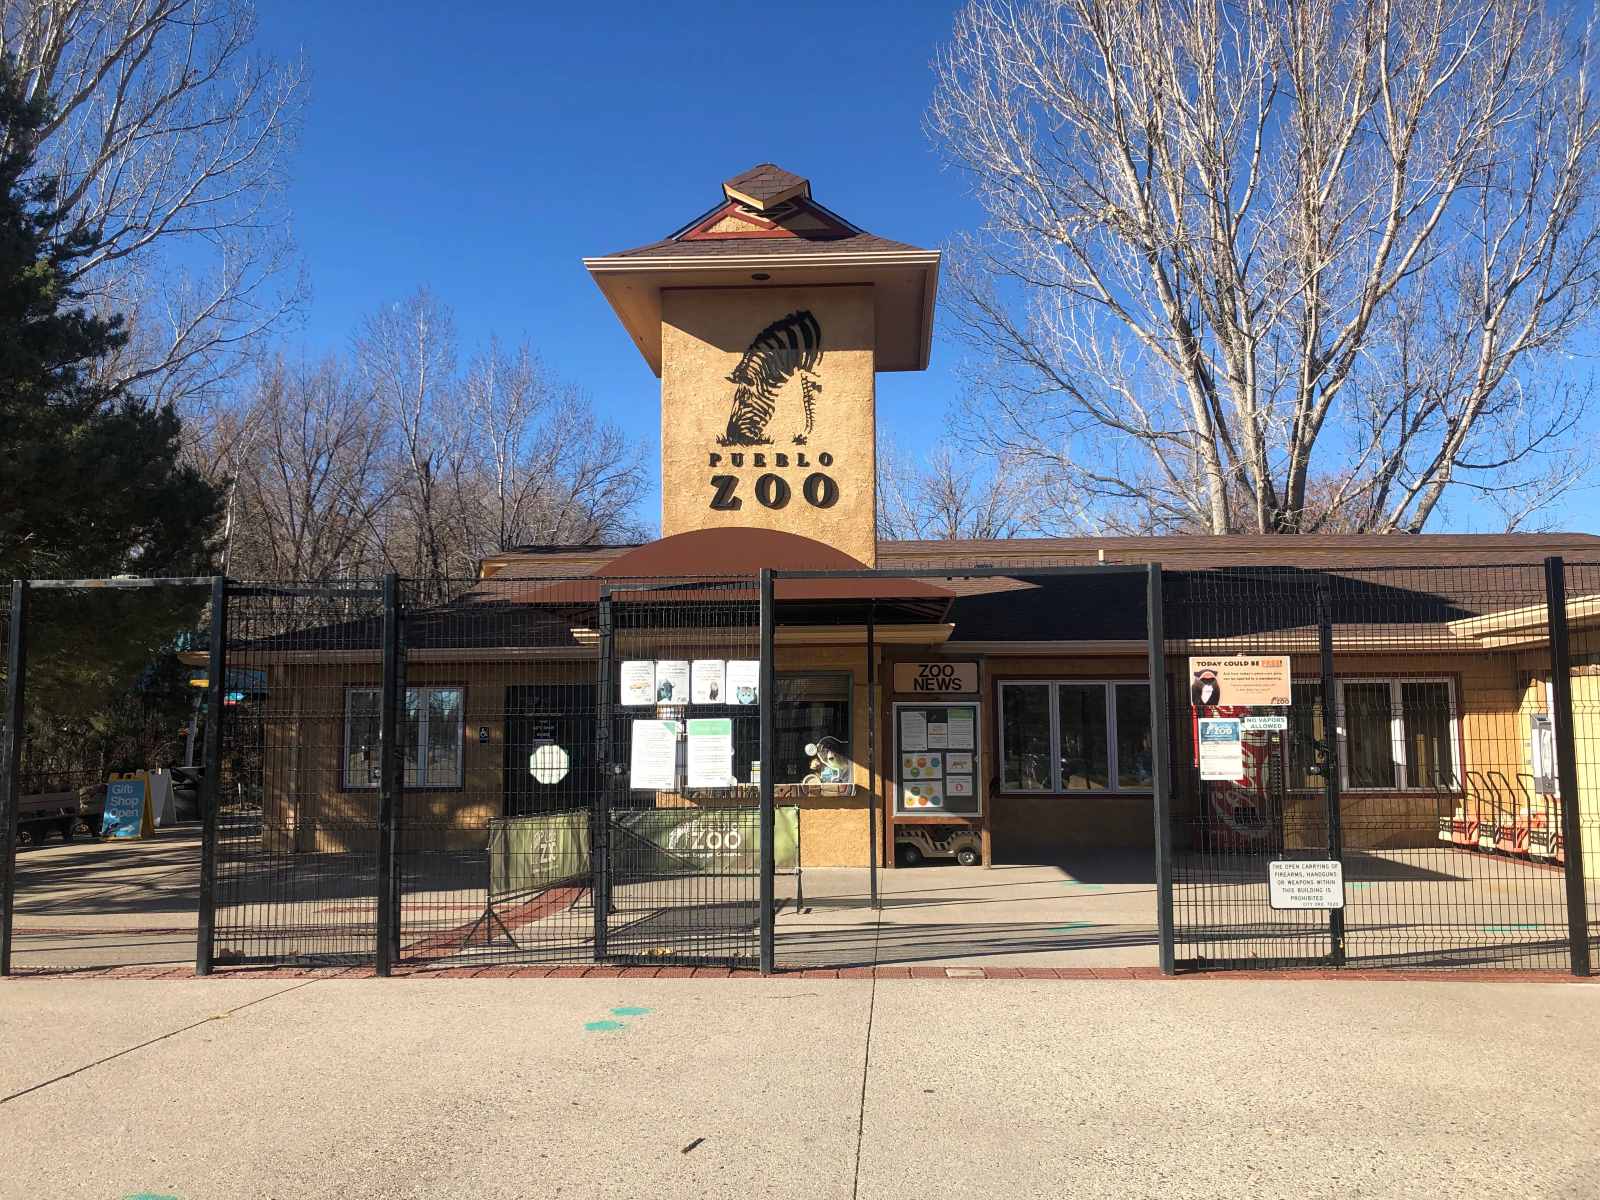 18 Captivating Facts About Pueblo Zoo - Facts.net